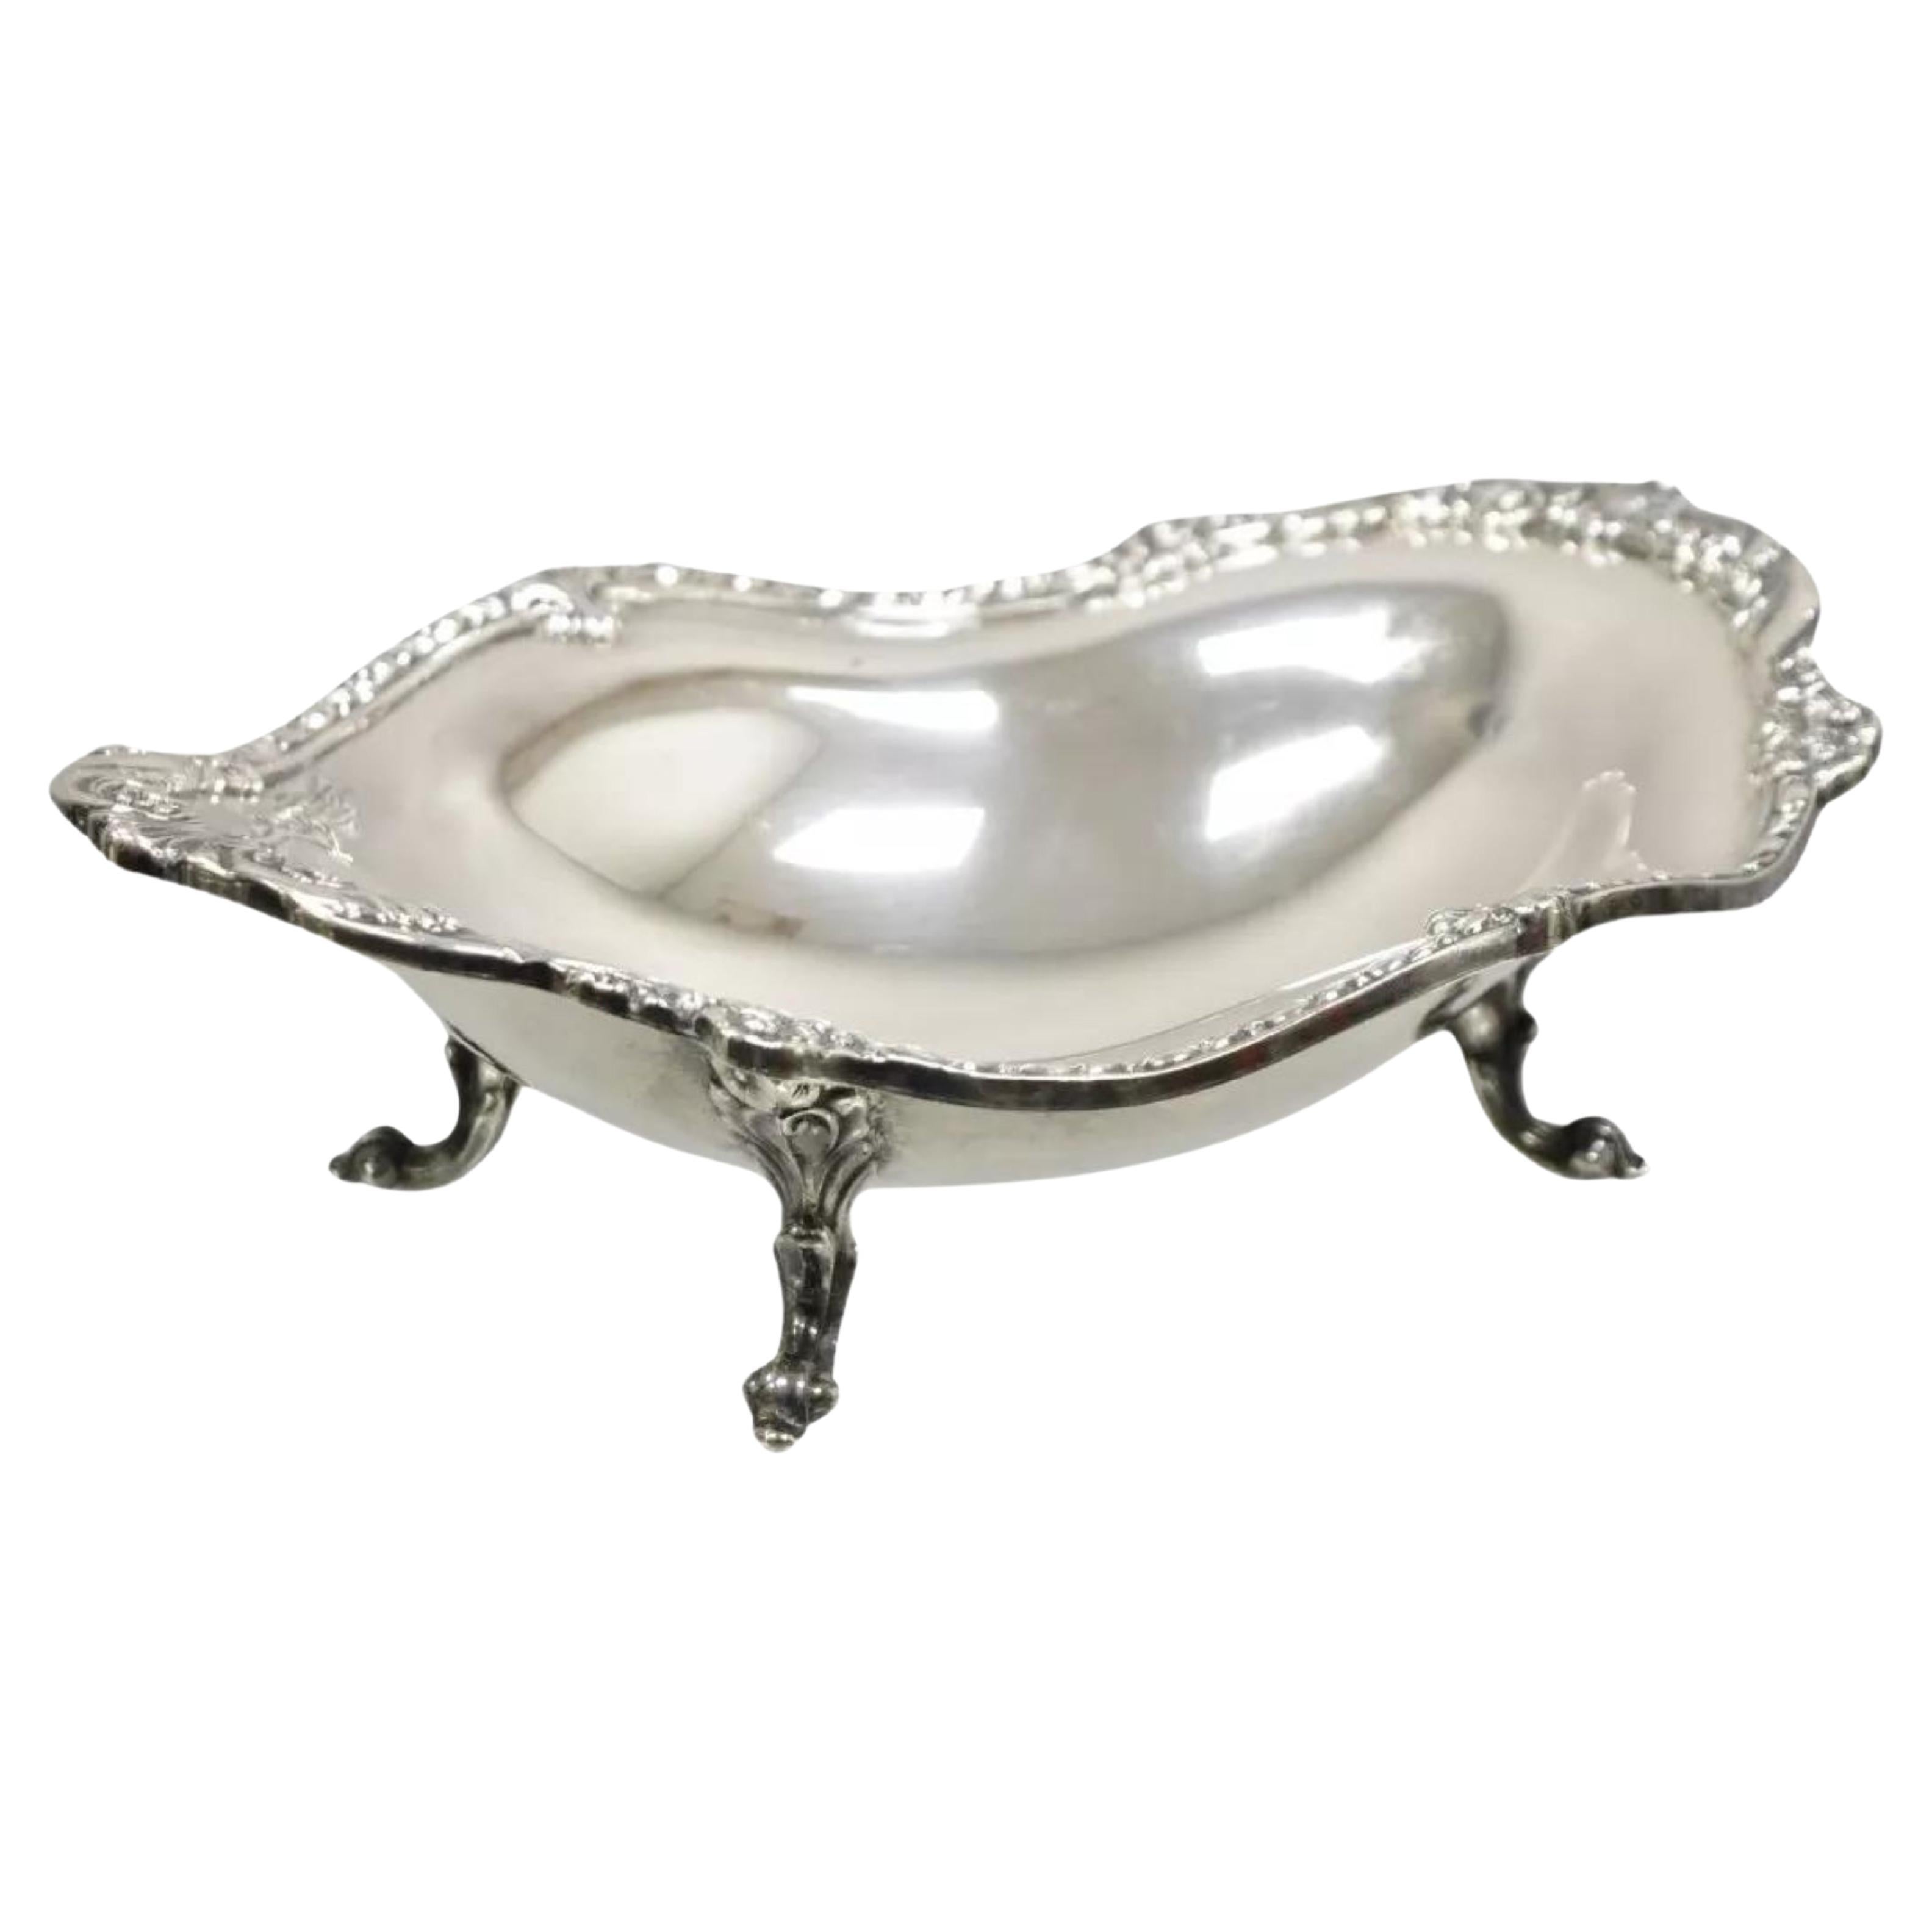 Vintage Sheridan Victorian Style Silver Plated Footed Scalloped Oval Fruit Bowl For Sale